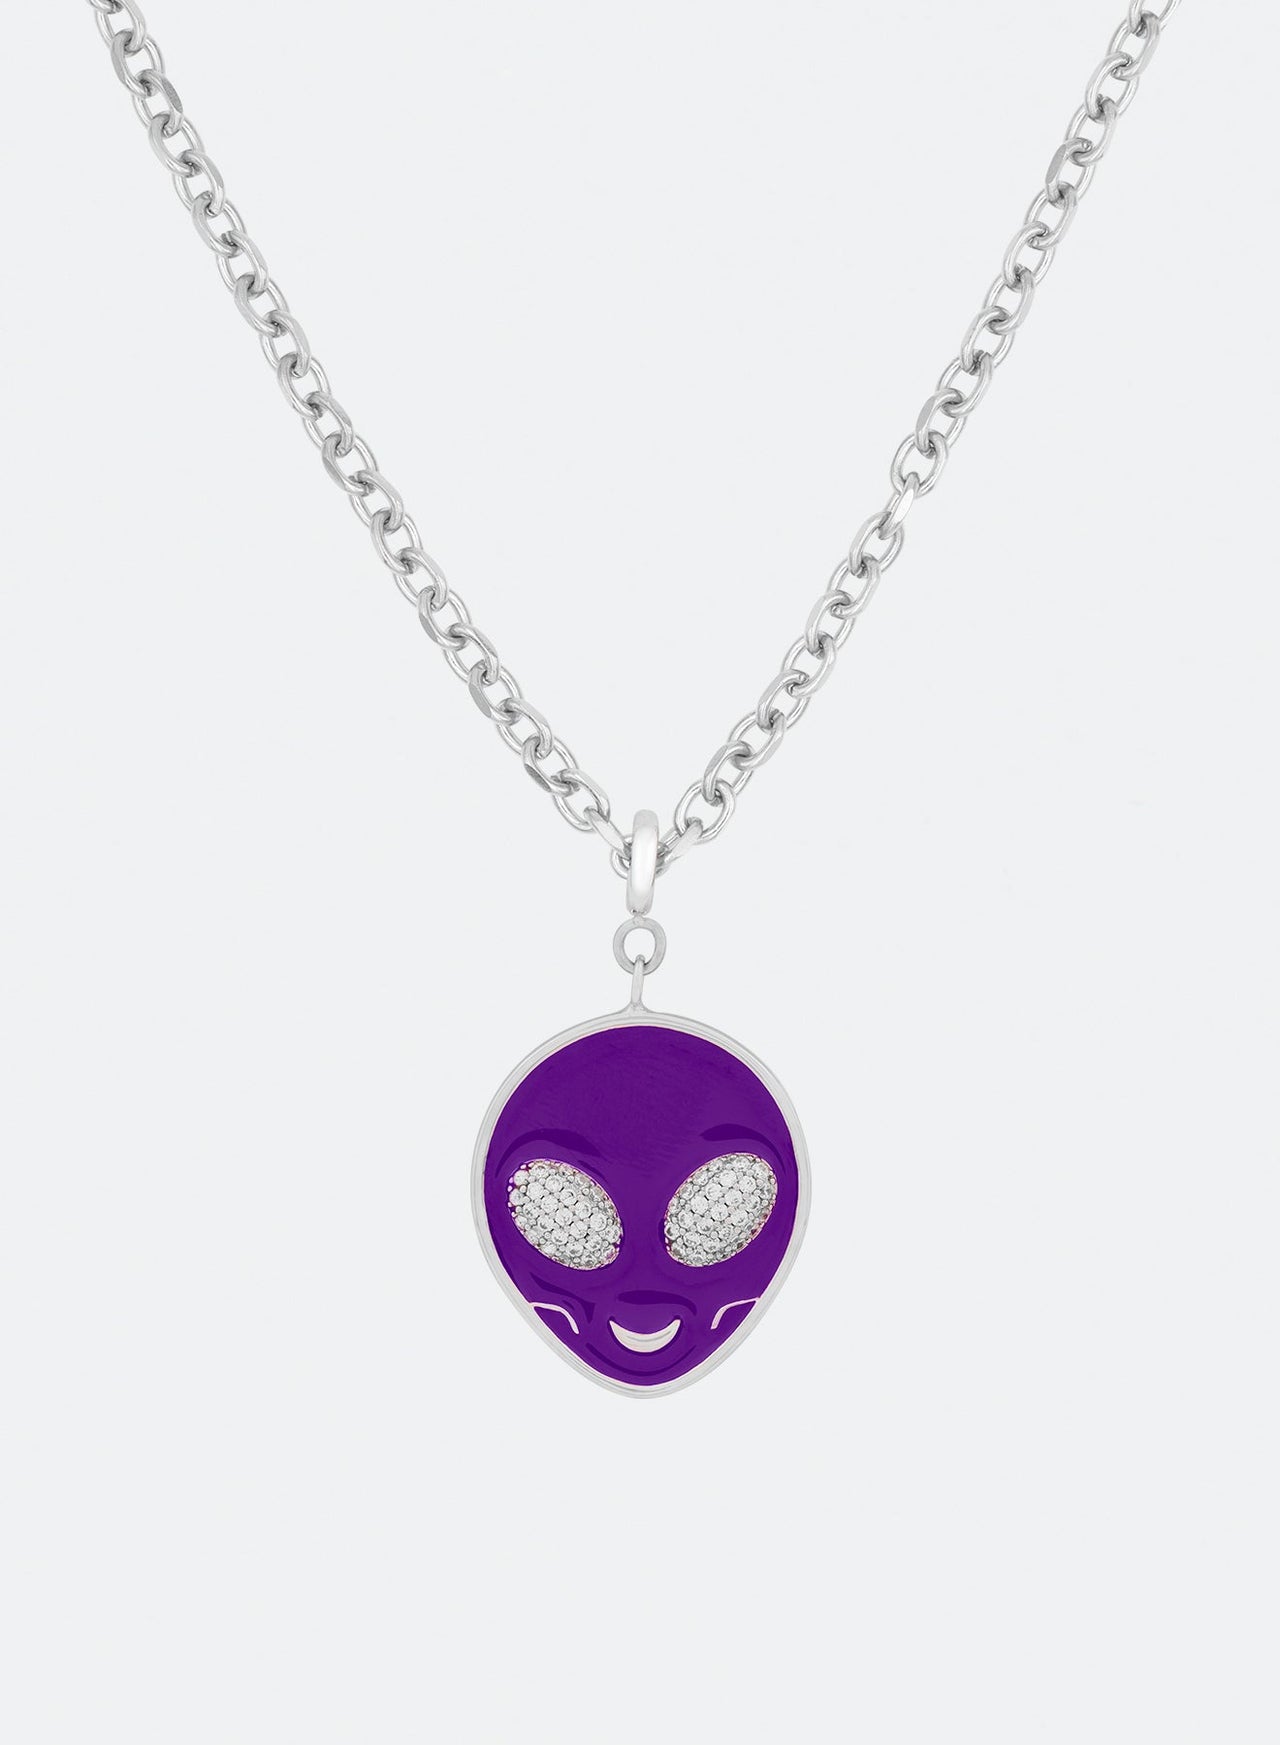 18k white gold coated alien pendant necklace with hand-set micropavé stones in white on purple hand painted glow in the dark alien pendant and 3mm rolo chain